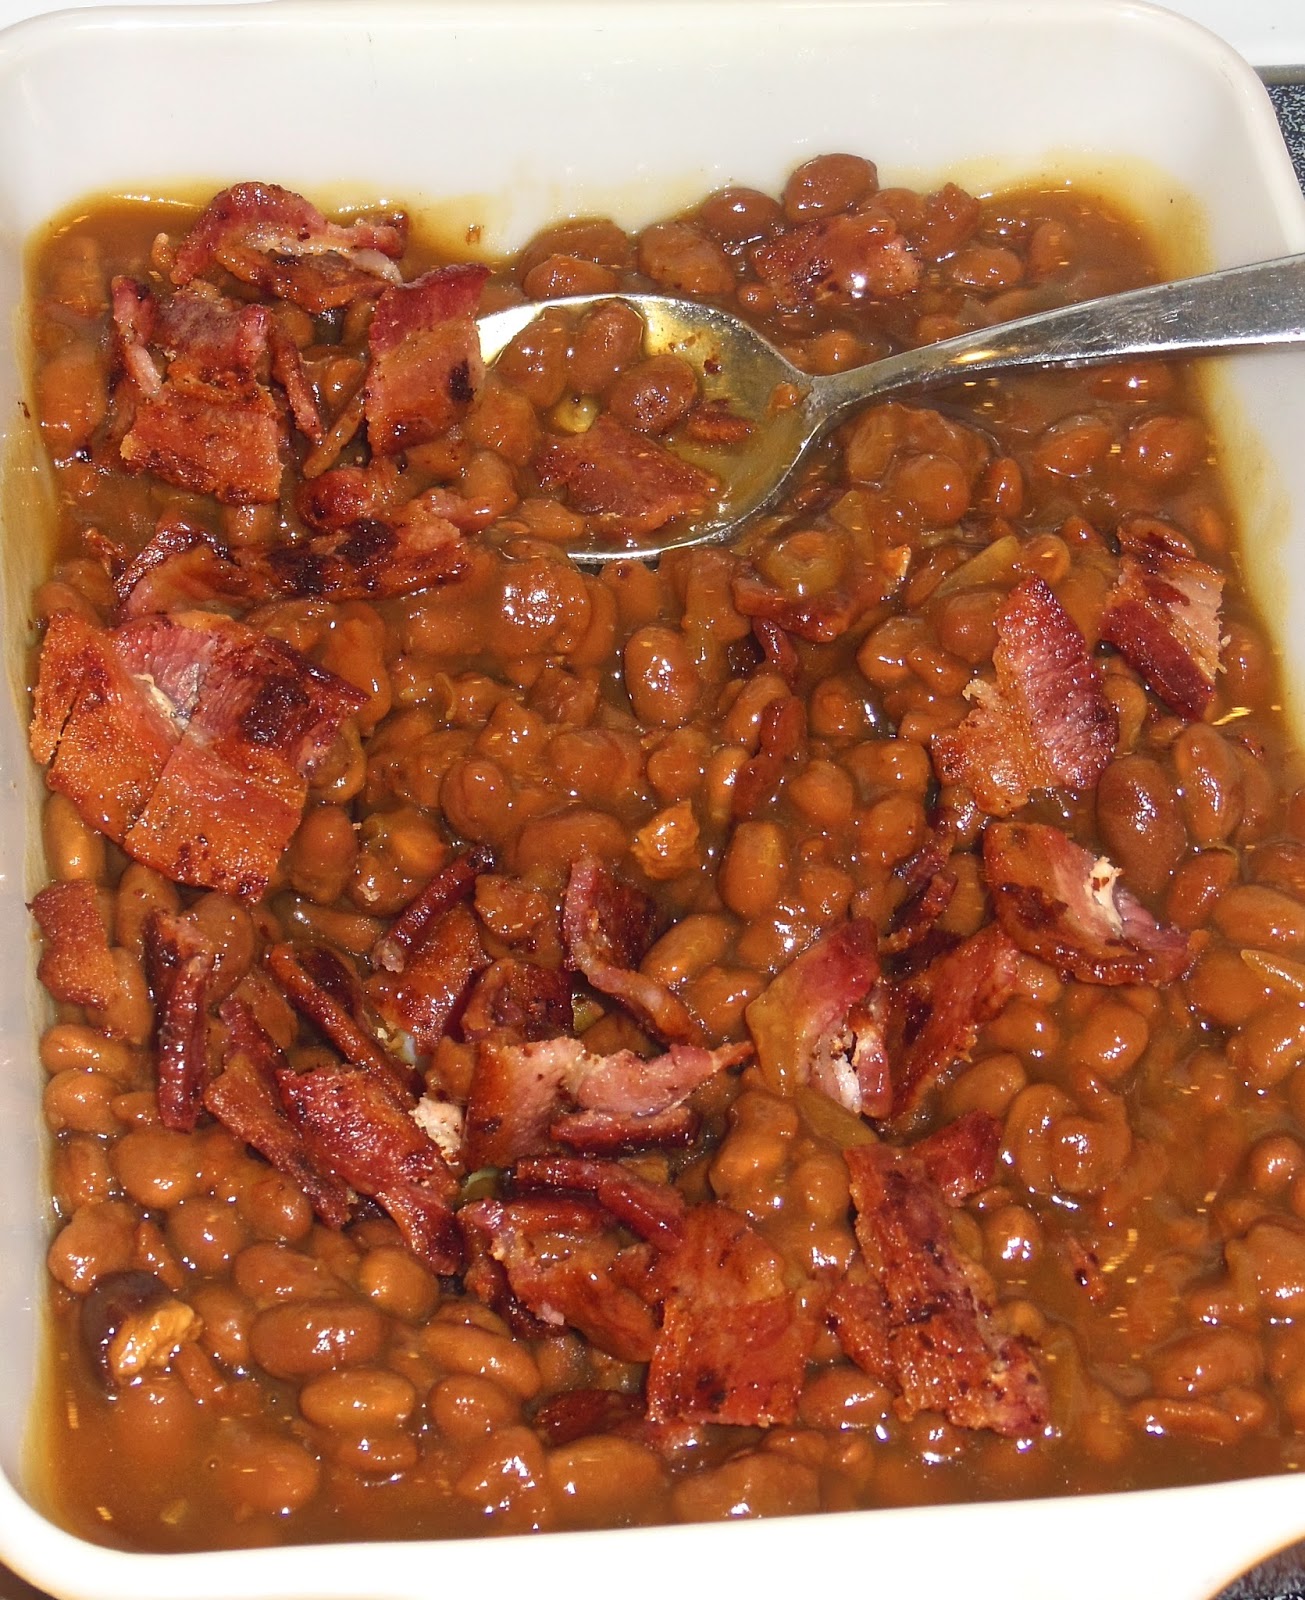 Lori's Culinary Creations: Mom's Baked Hot Dogs with Beans